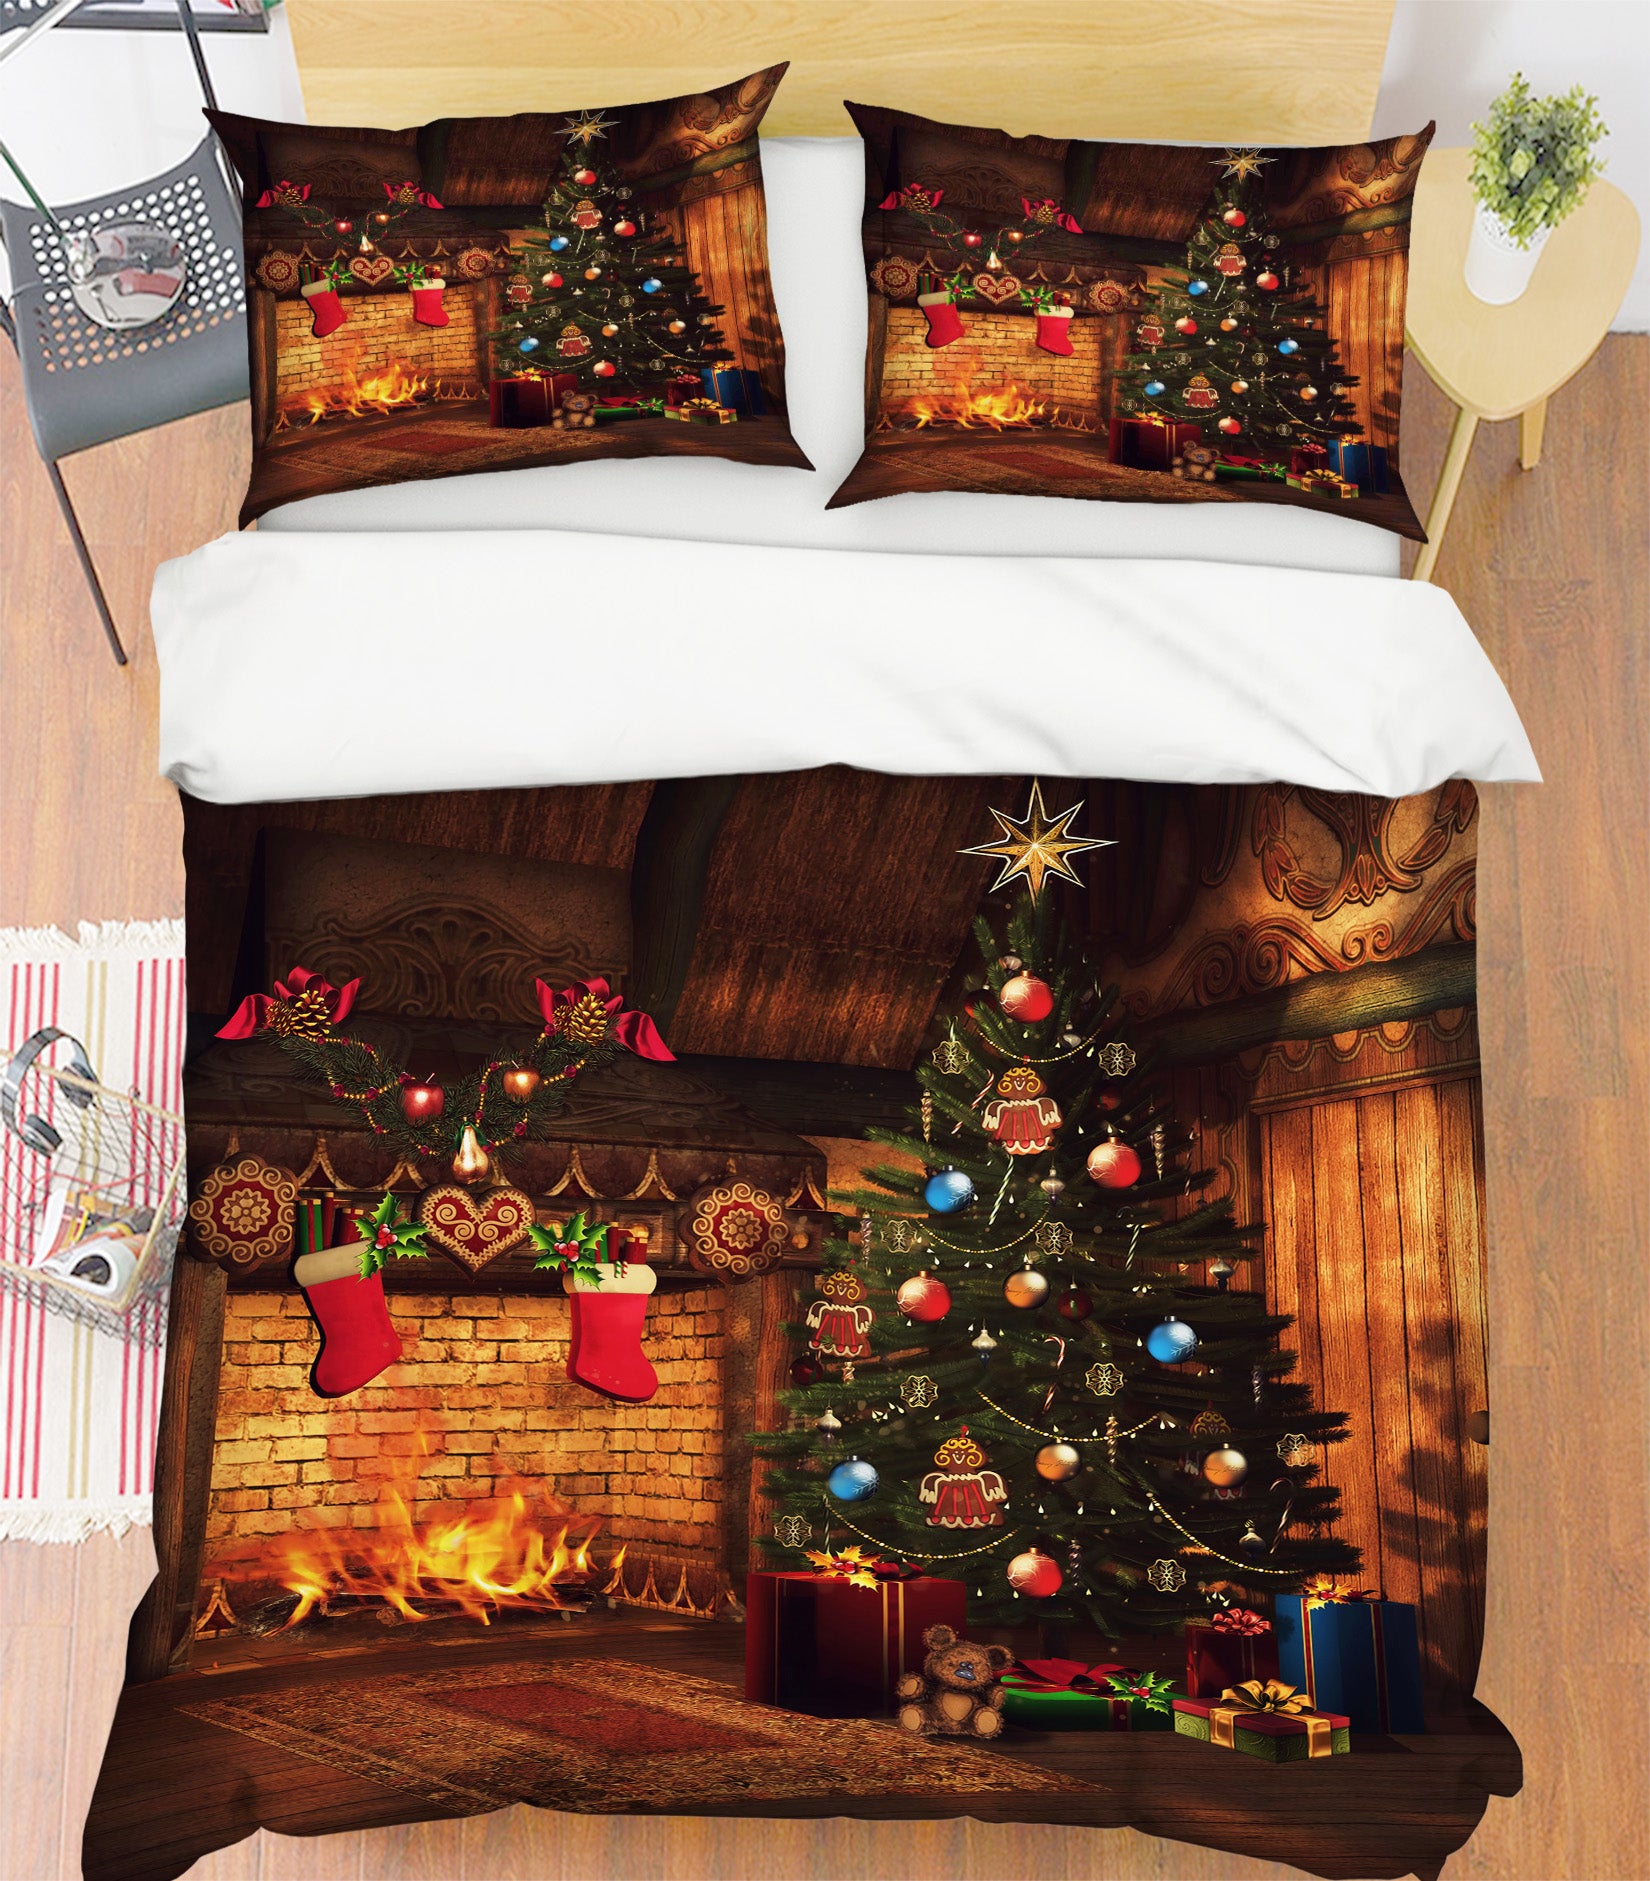 3D Fireplace Tree 52243 Christmas Quilt Duvet Cover Xmas Bed Pillowcases